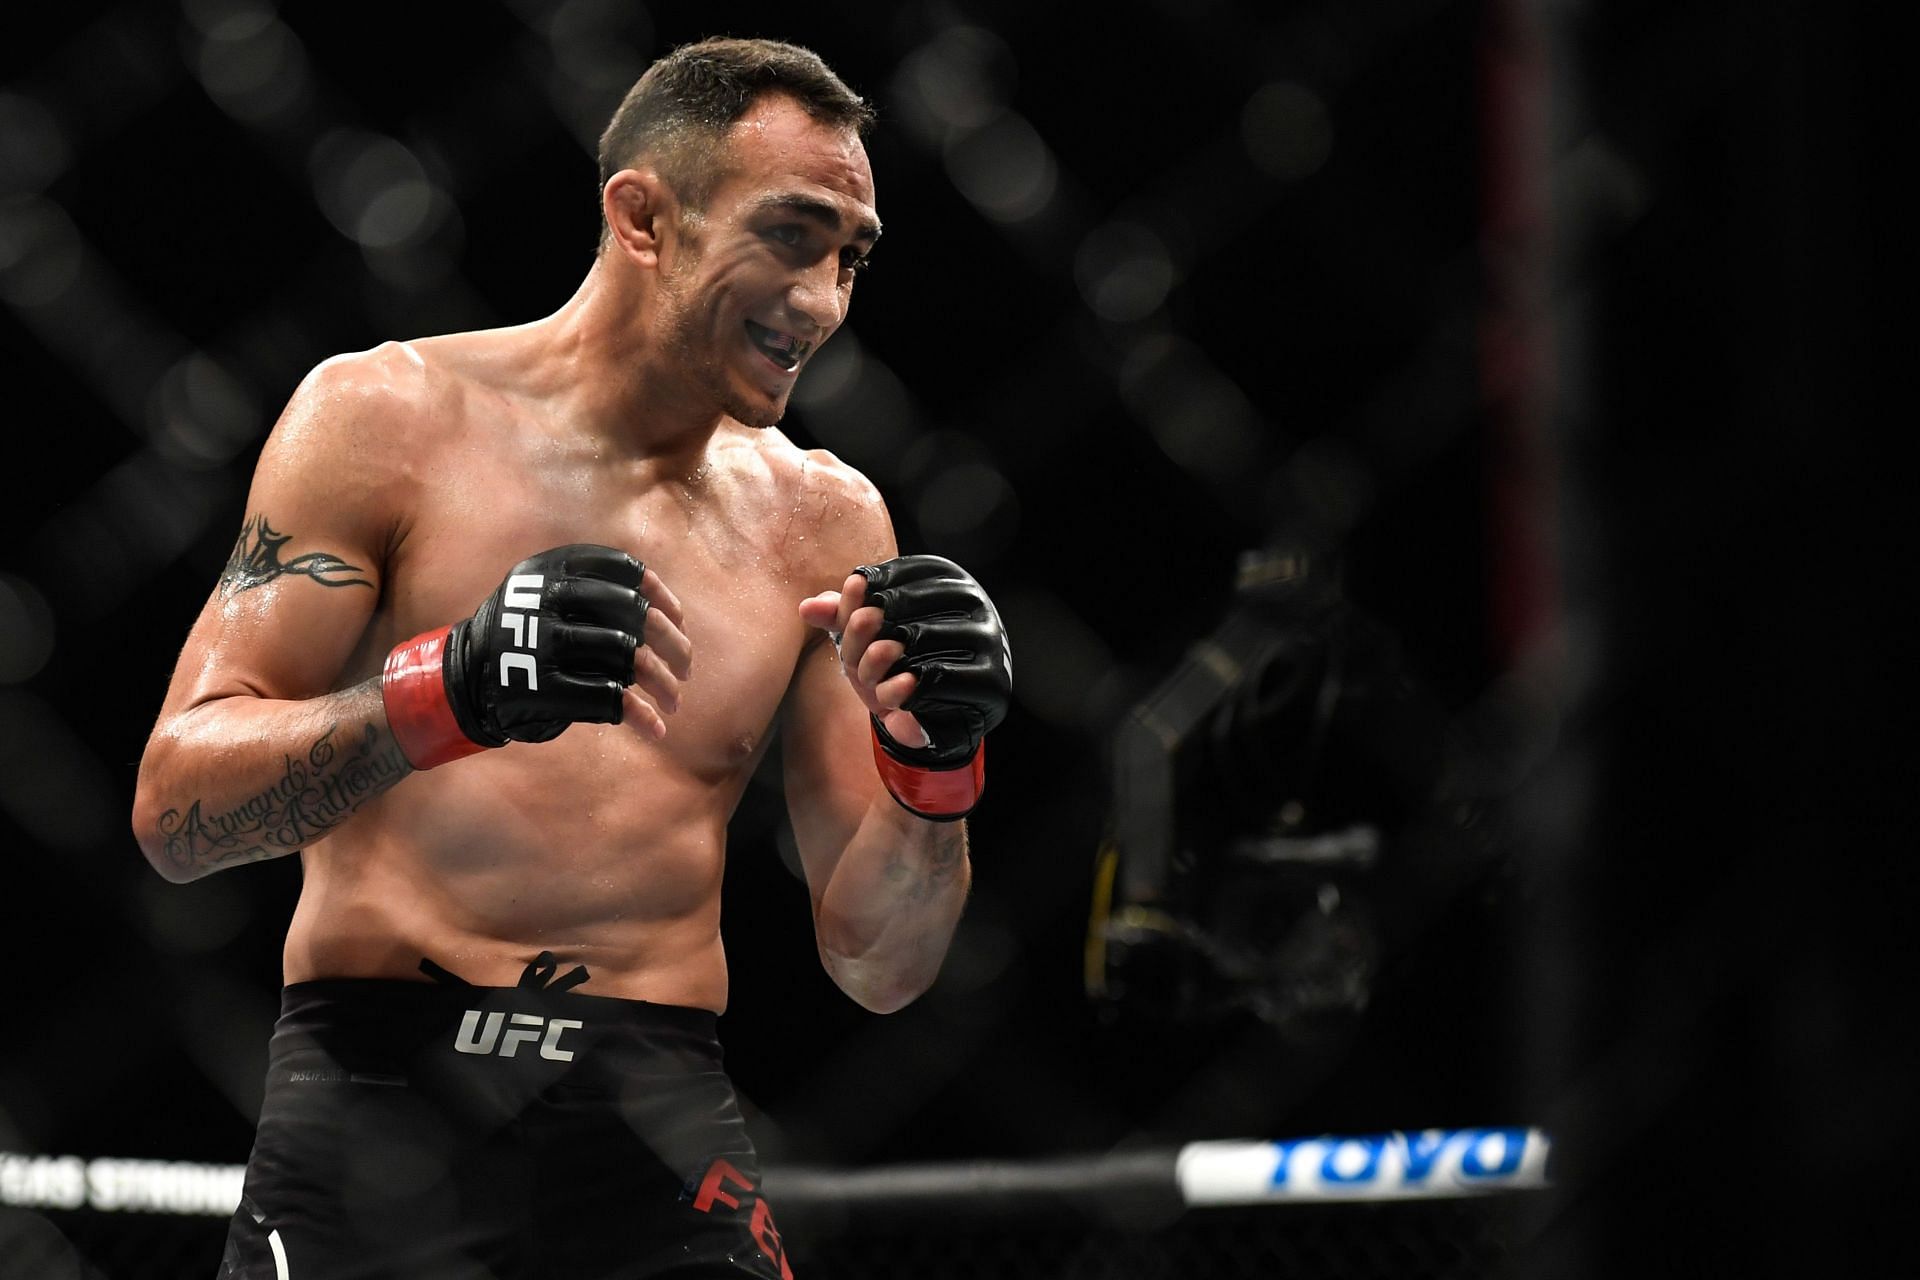 After suffering a series of losses, the end could be nigh for Tony Ferguson